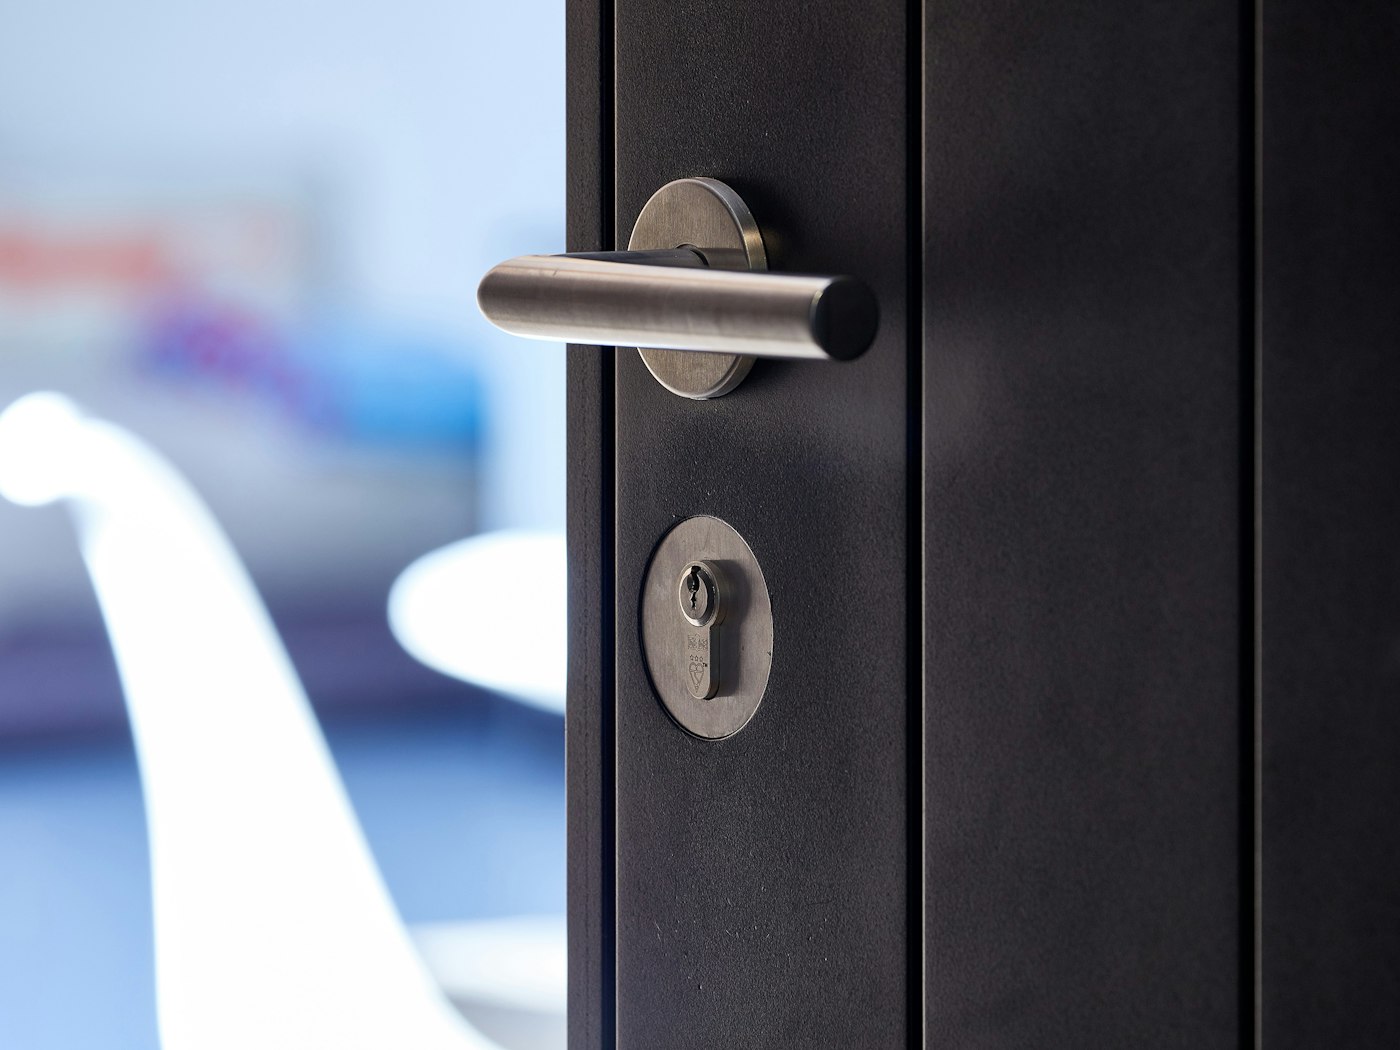 A stainless steel lever handle complements the black painted door